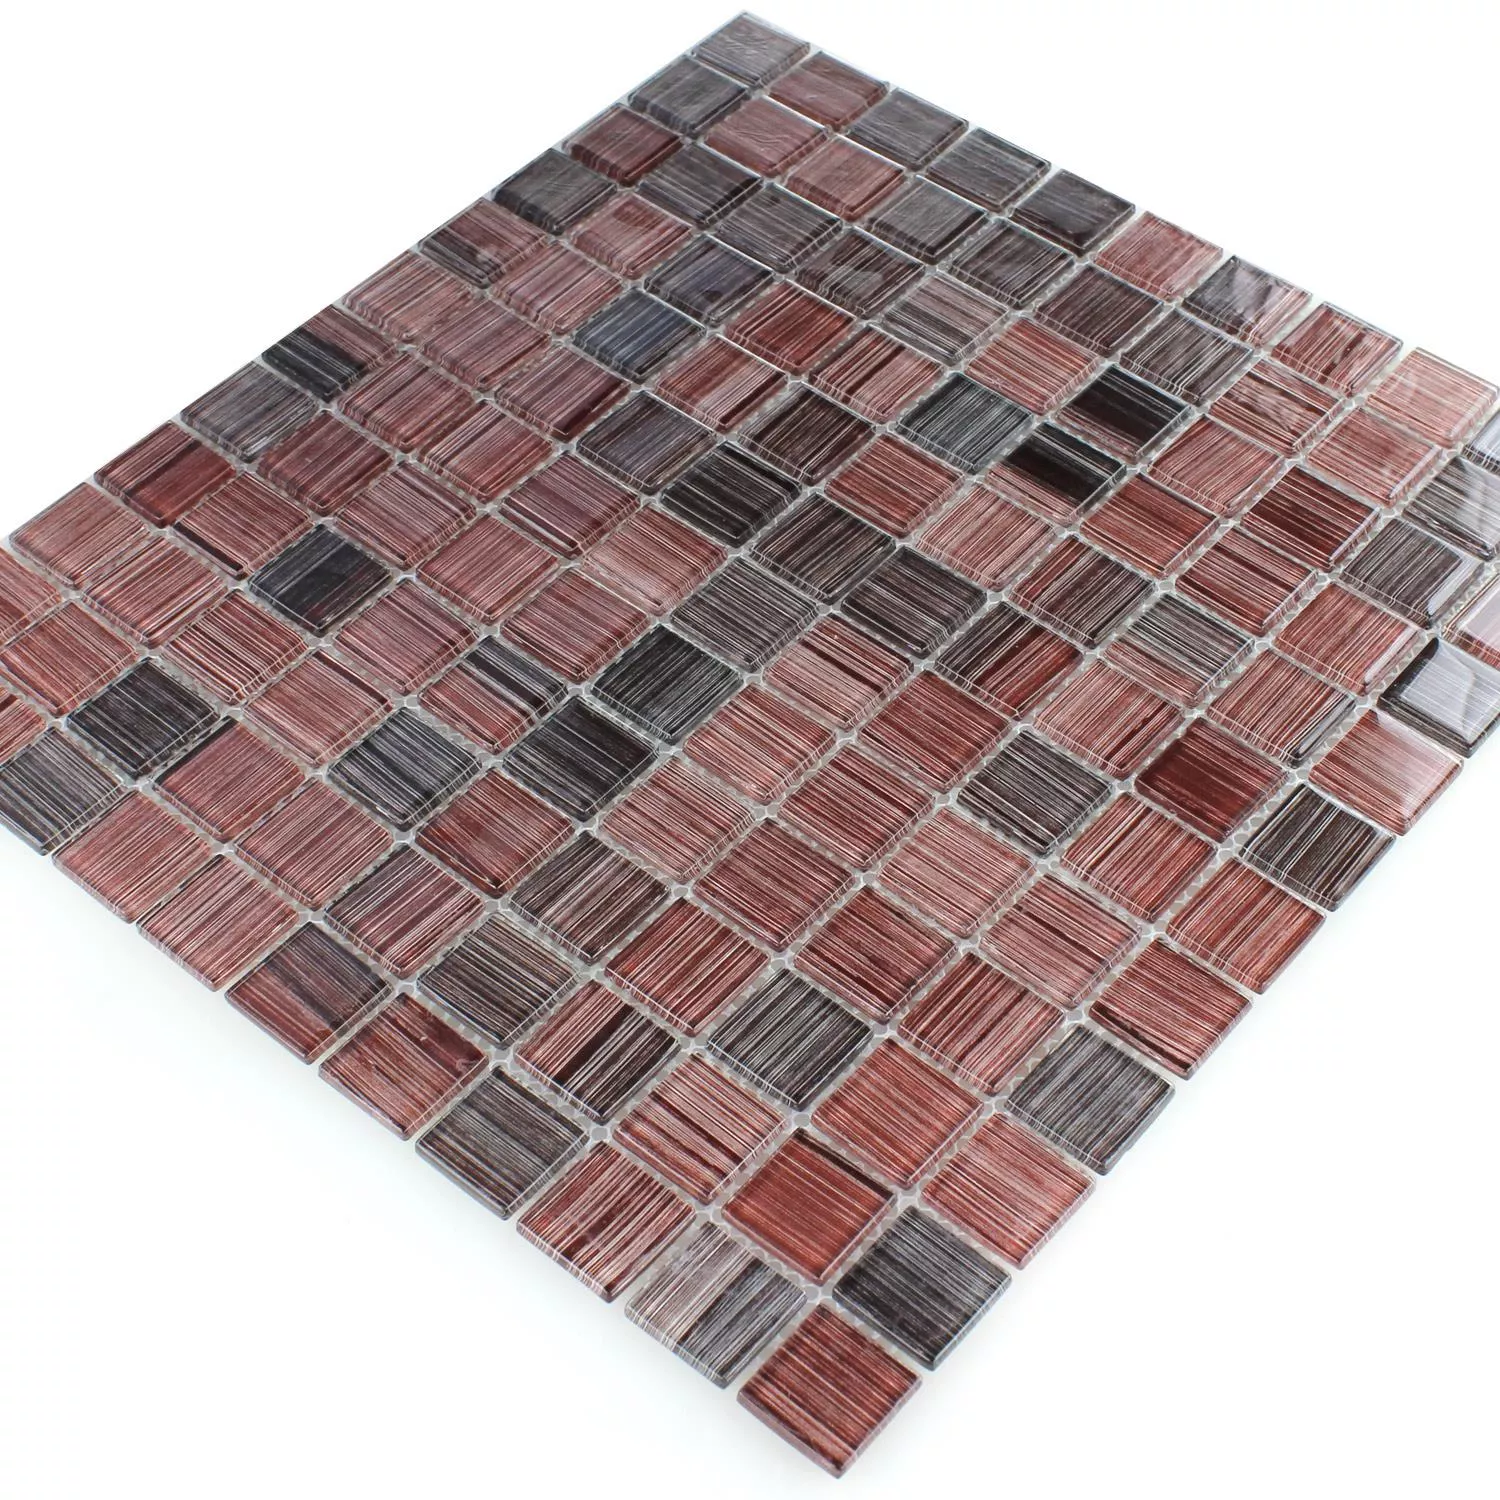 Striped Crystal Mosaic Tiles Glass Brown Mix